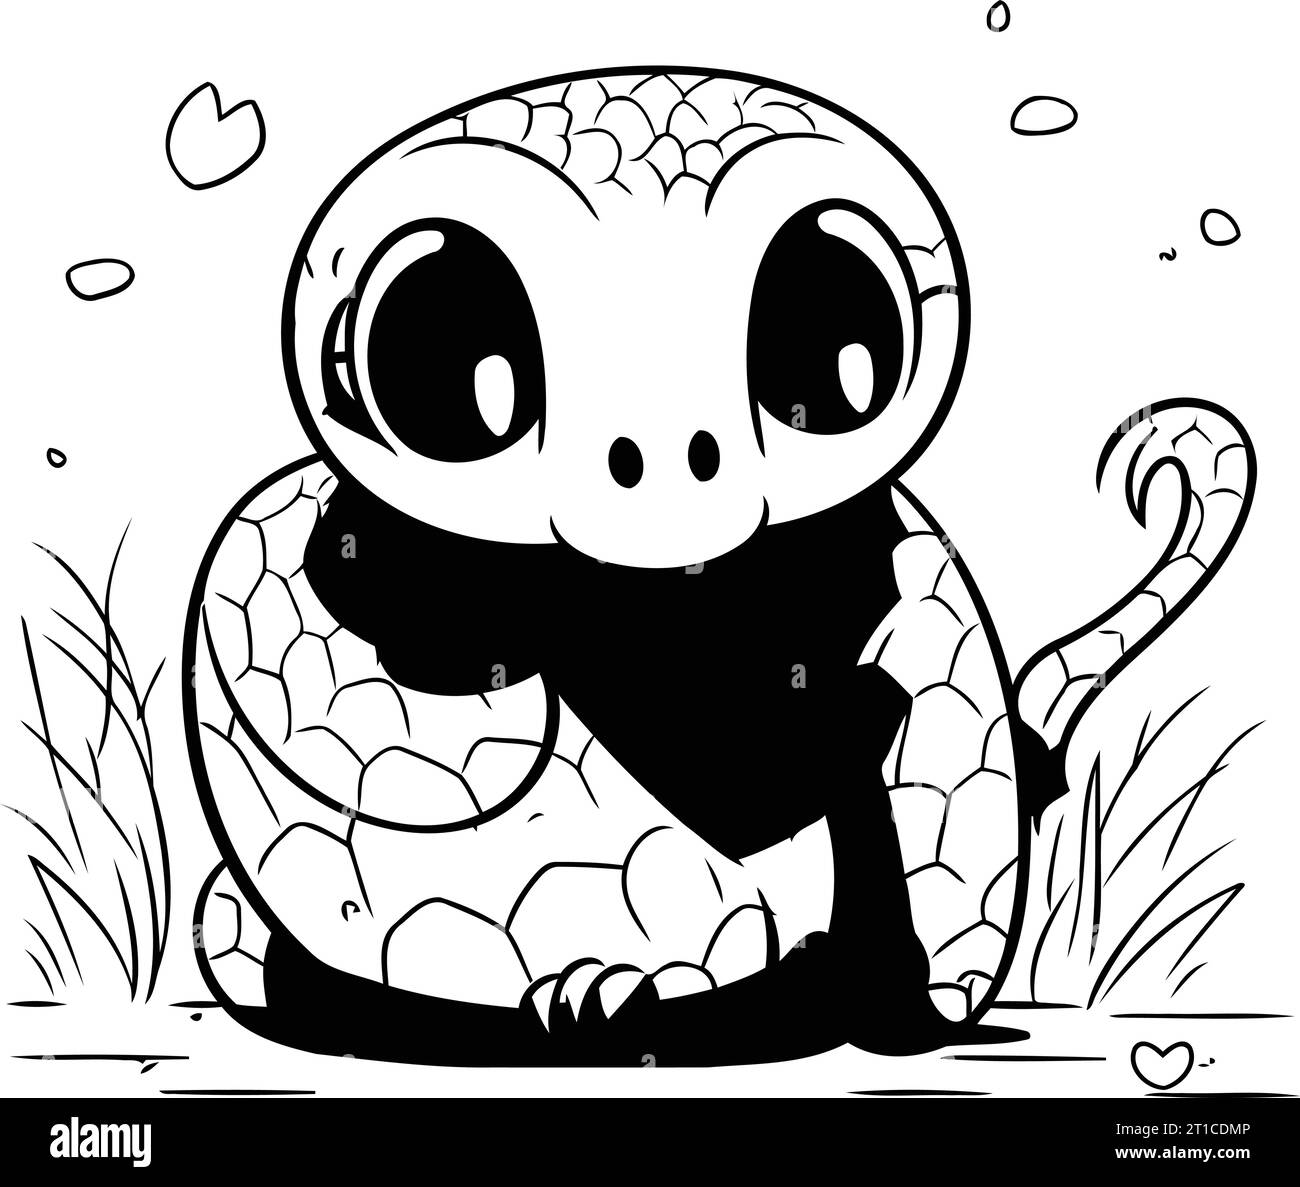 Cute cartoon snake. Black and white vector illustration isolated on white background. Stock Vector